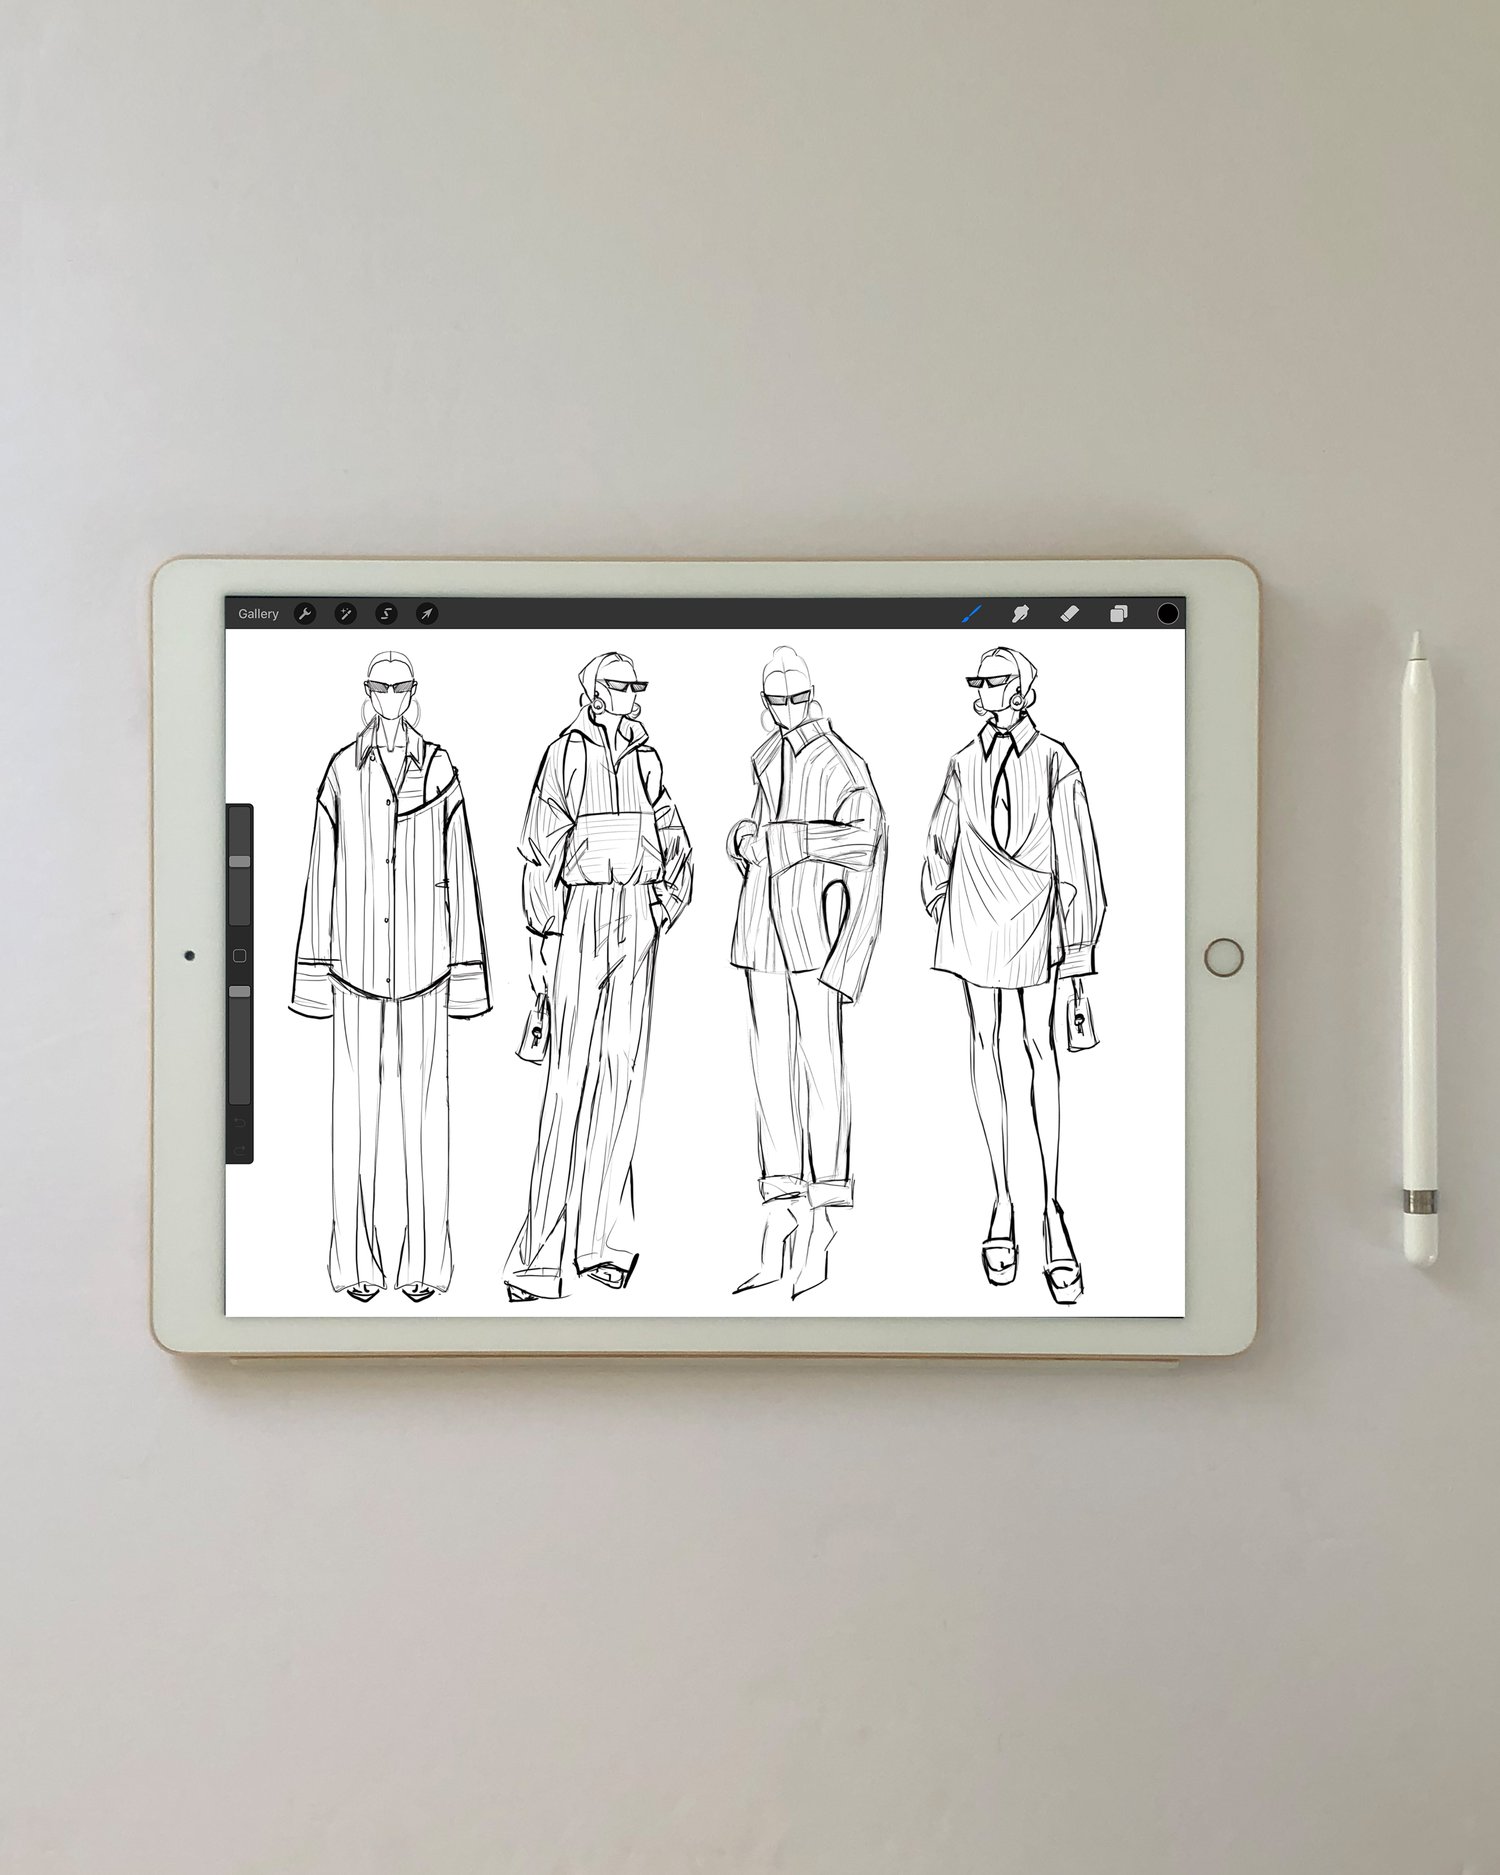 Clothing Design Sketchbook: Show Off Your Creativity Confidently